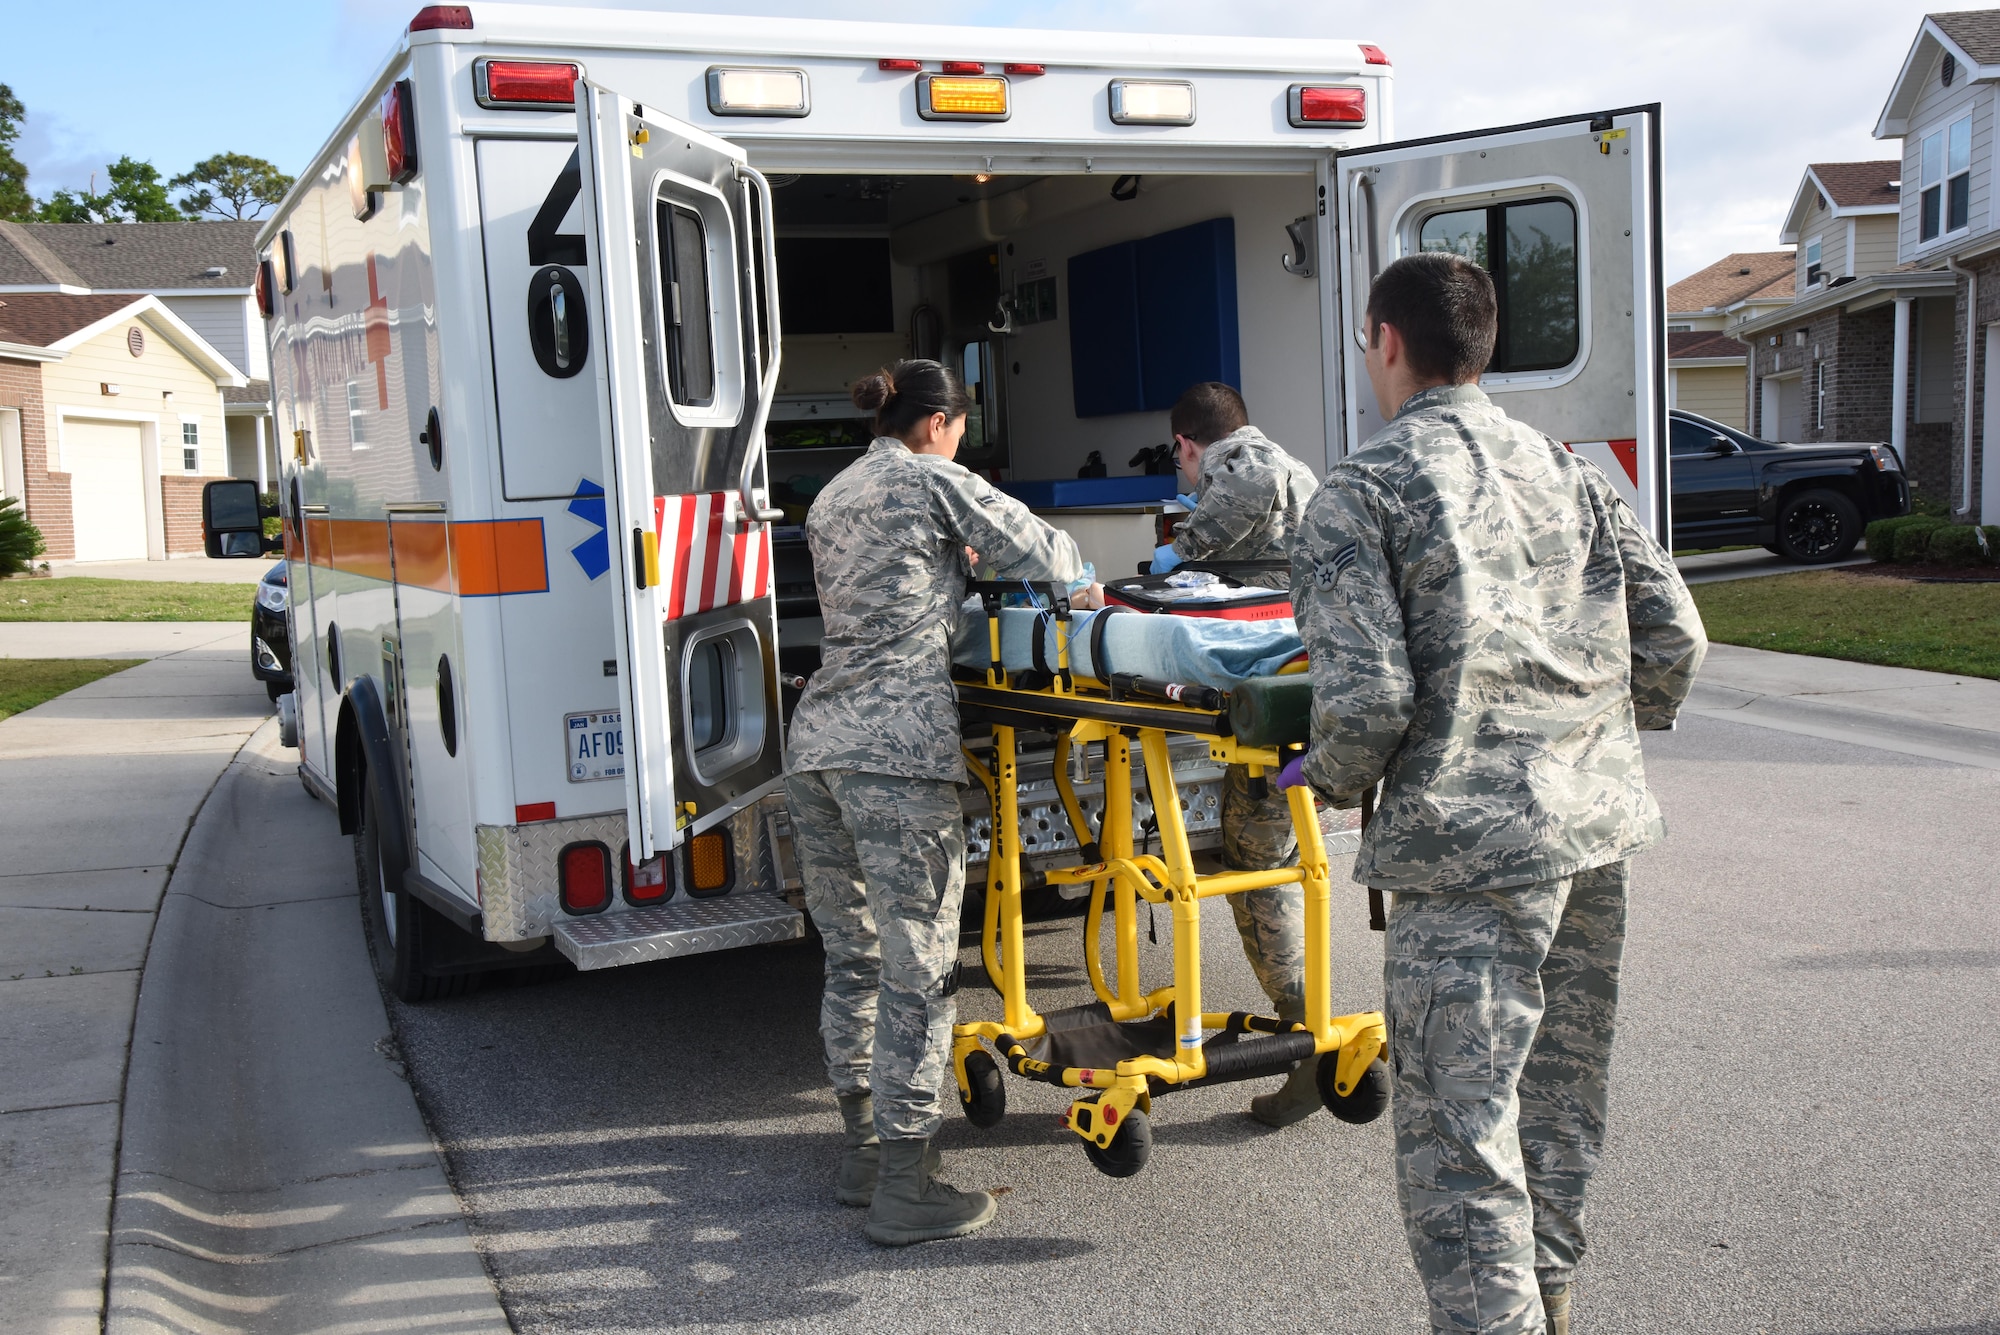 Airmen 1st Class Jacqueline Salazar and Andrew Frost and Senior Airman Brock Mauldin, 81st Medical Operations Squadron medical technicians, load an infant “patient” into an ambulance during a medical emergency scenario in East Falcon May 24, 2017, in Biloxi, Miss. Emergency room staff members coordinated with the simulation lab to use human patient simulators for running various advanced cardiac life support scenarios to improve Keesler’s new medical technicians’ skills and get them familiar with emergency equipment. (U.S. Air Force photo by Kemberly Groue)